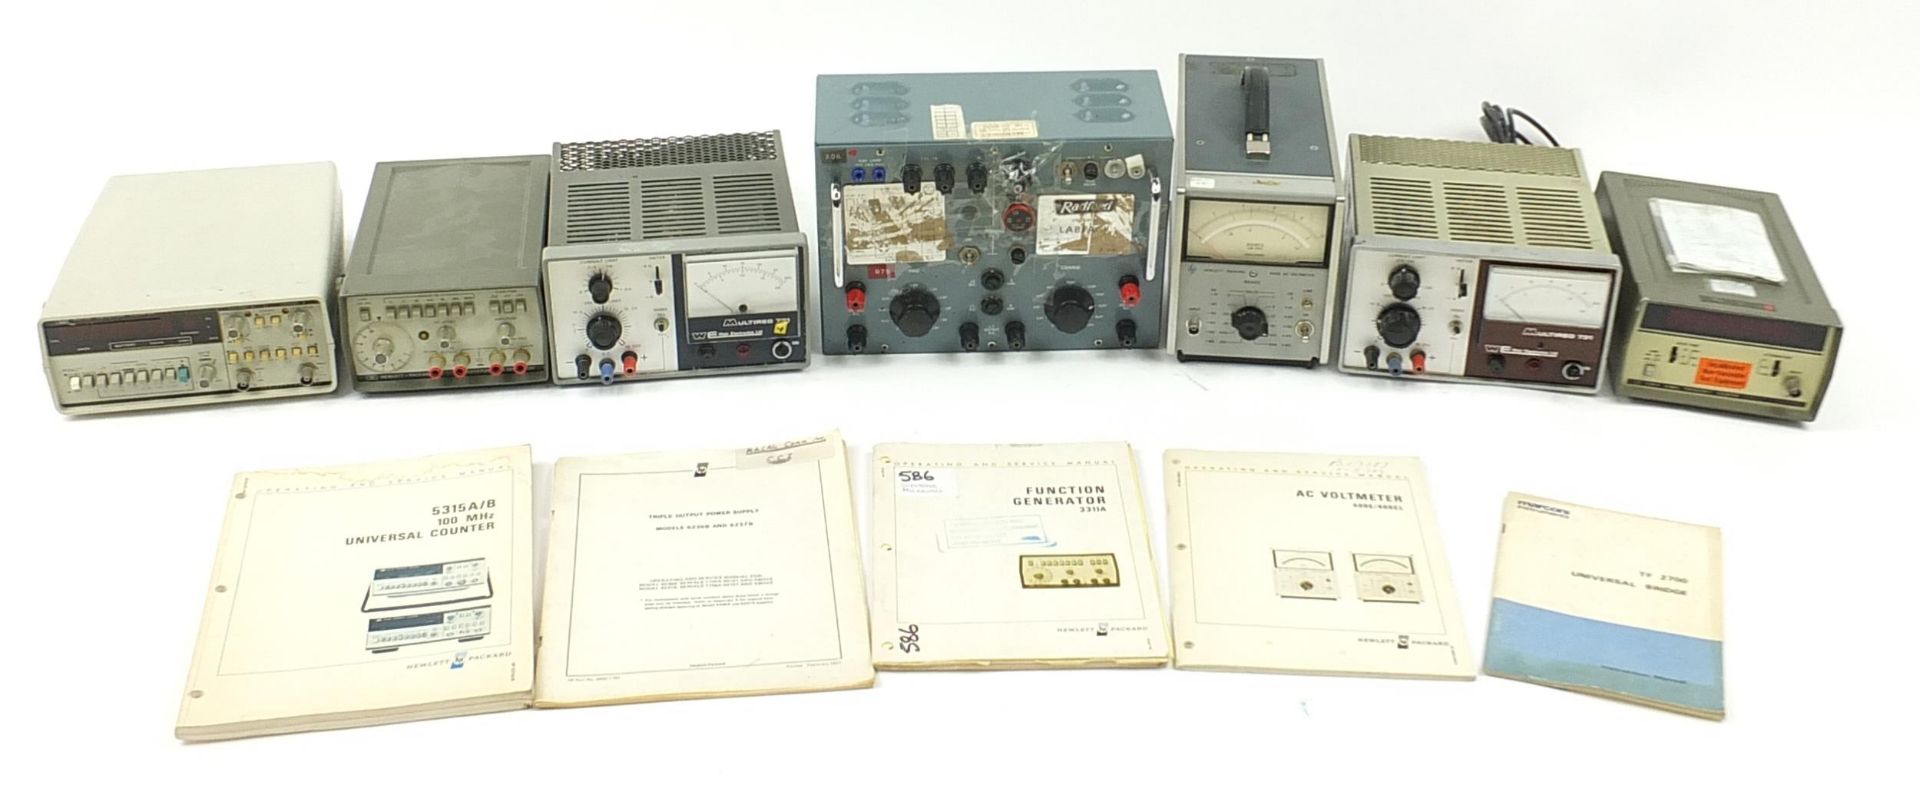 Vintage electricals including two Weir Electronics Multireg power supplies, Radford Universal